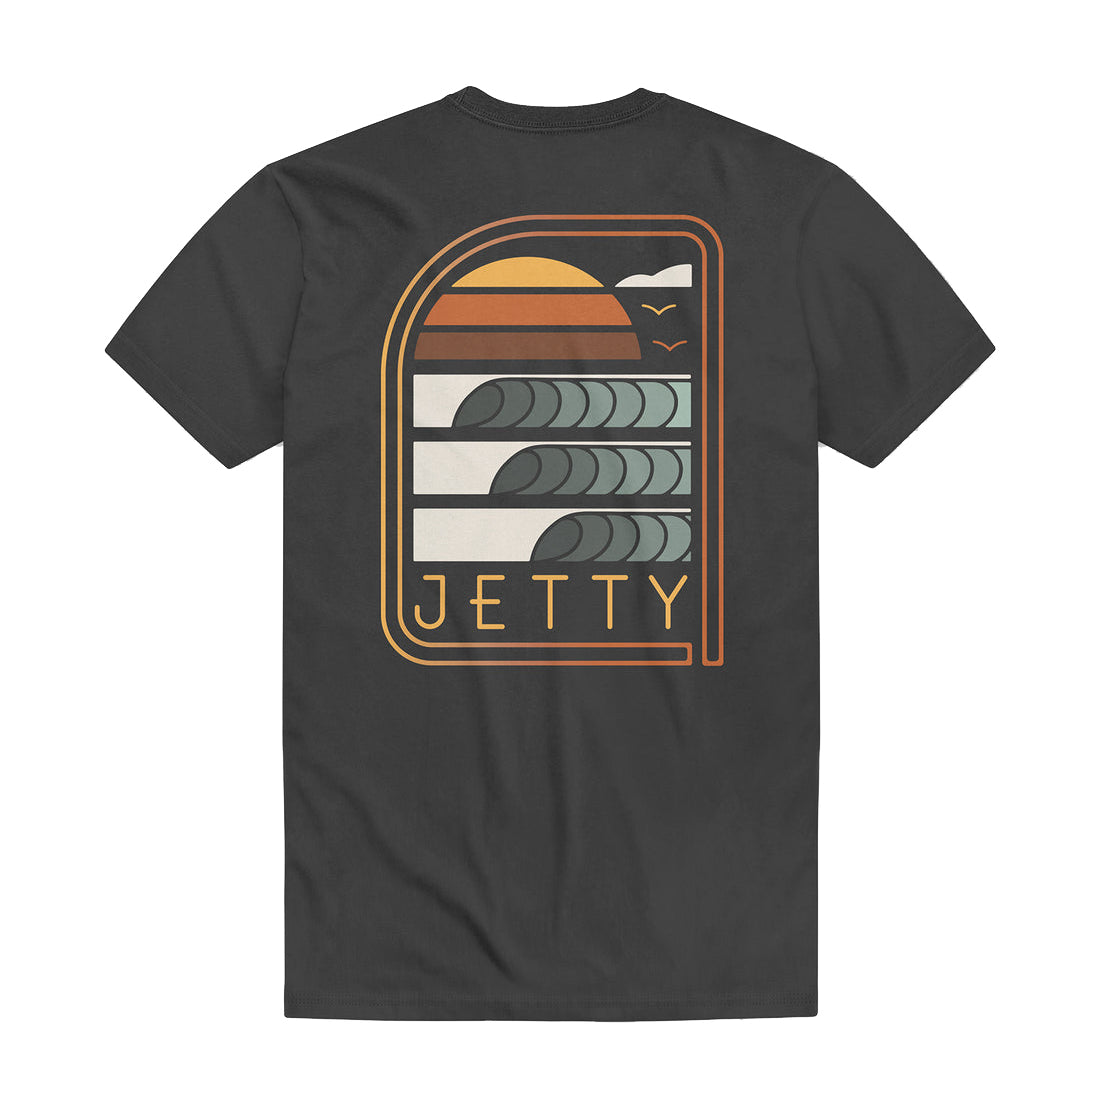 Jetty Sunup SS Tee Charcoal S